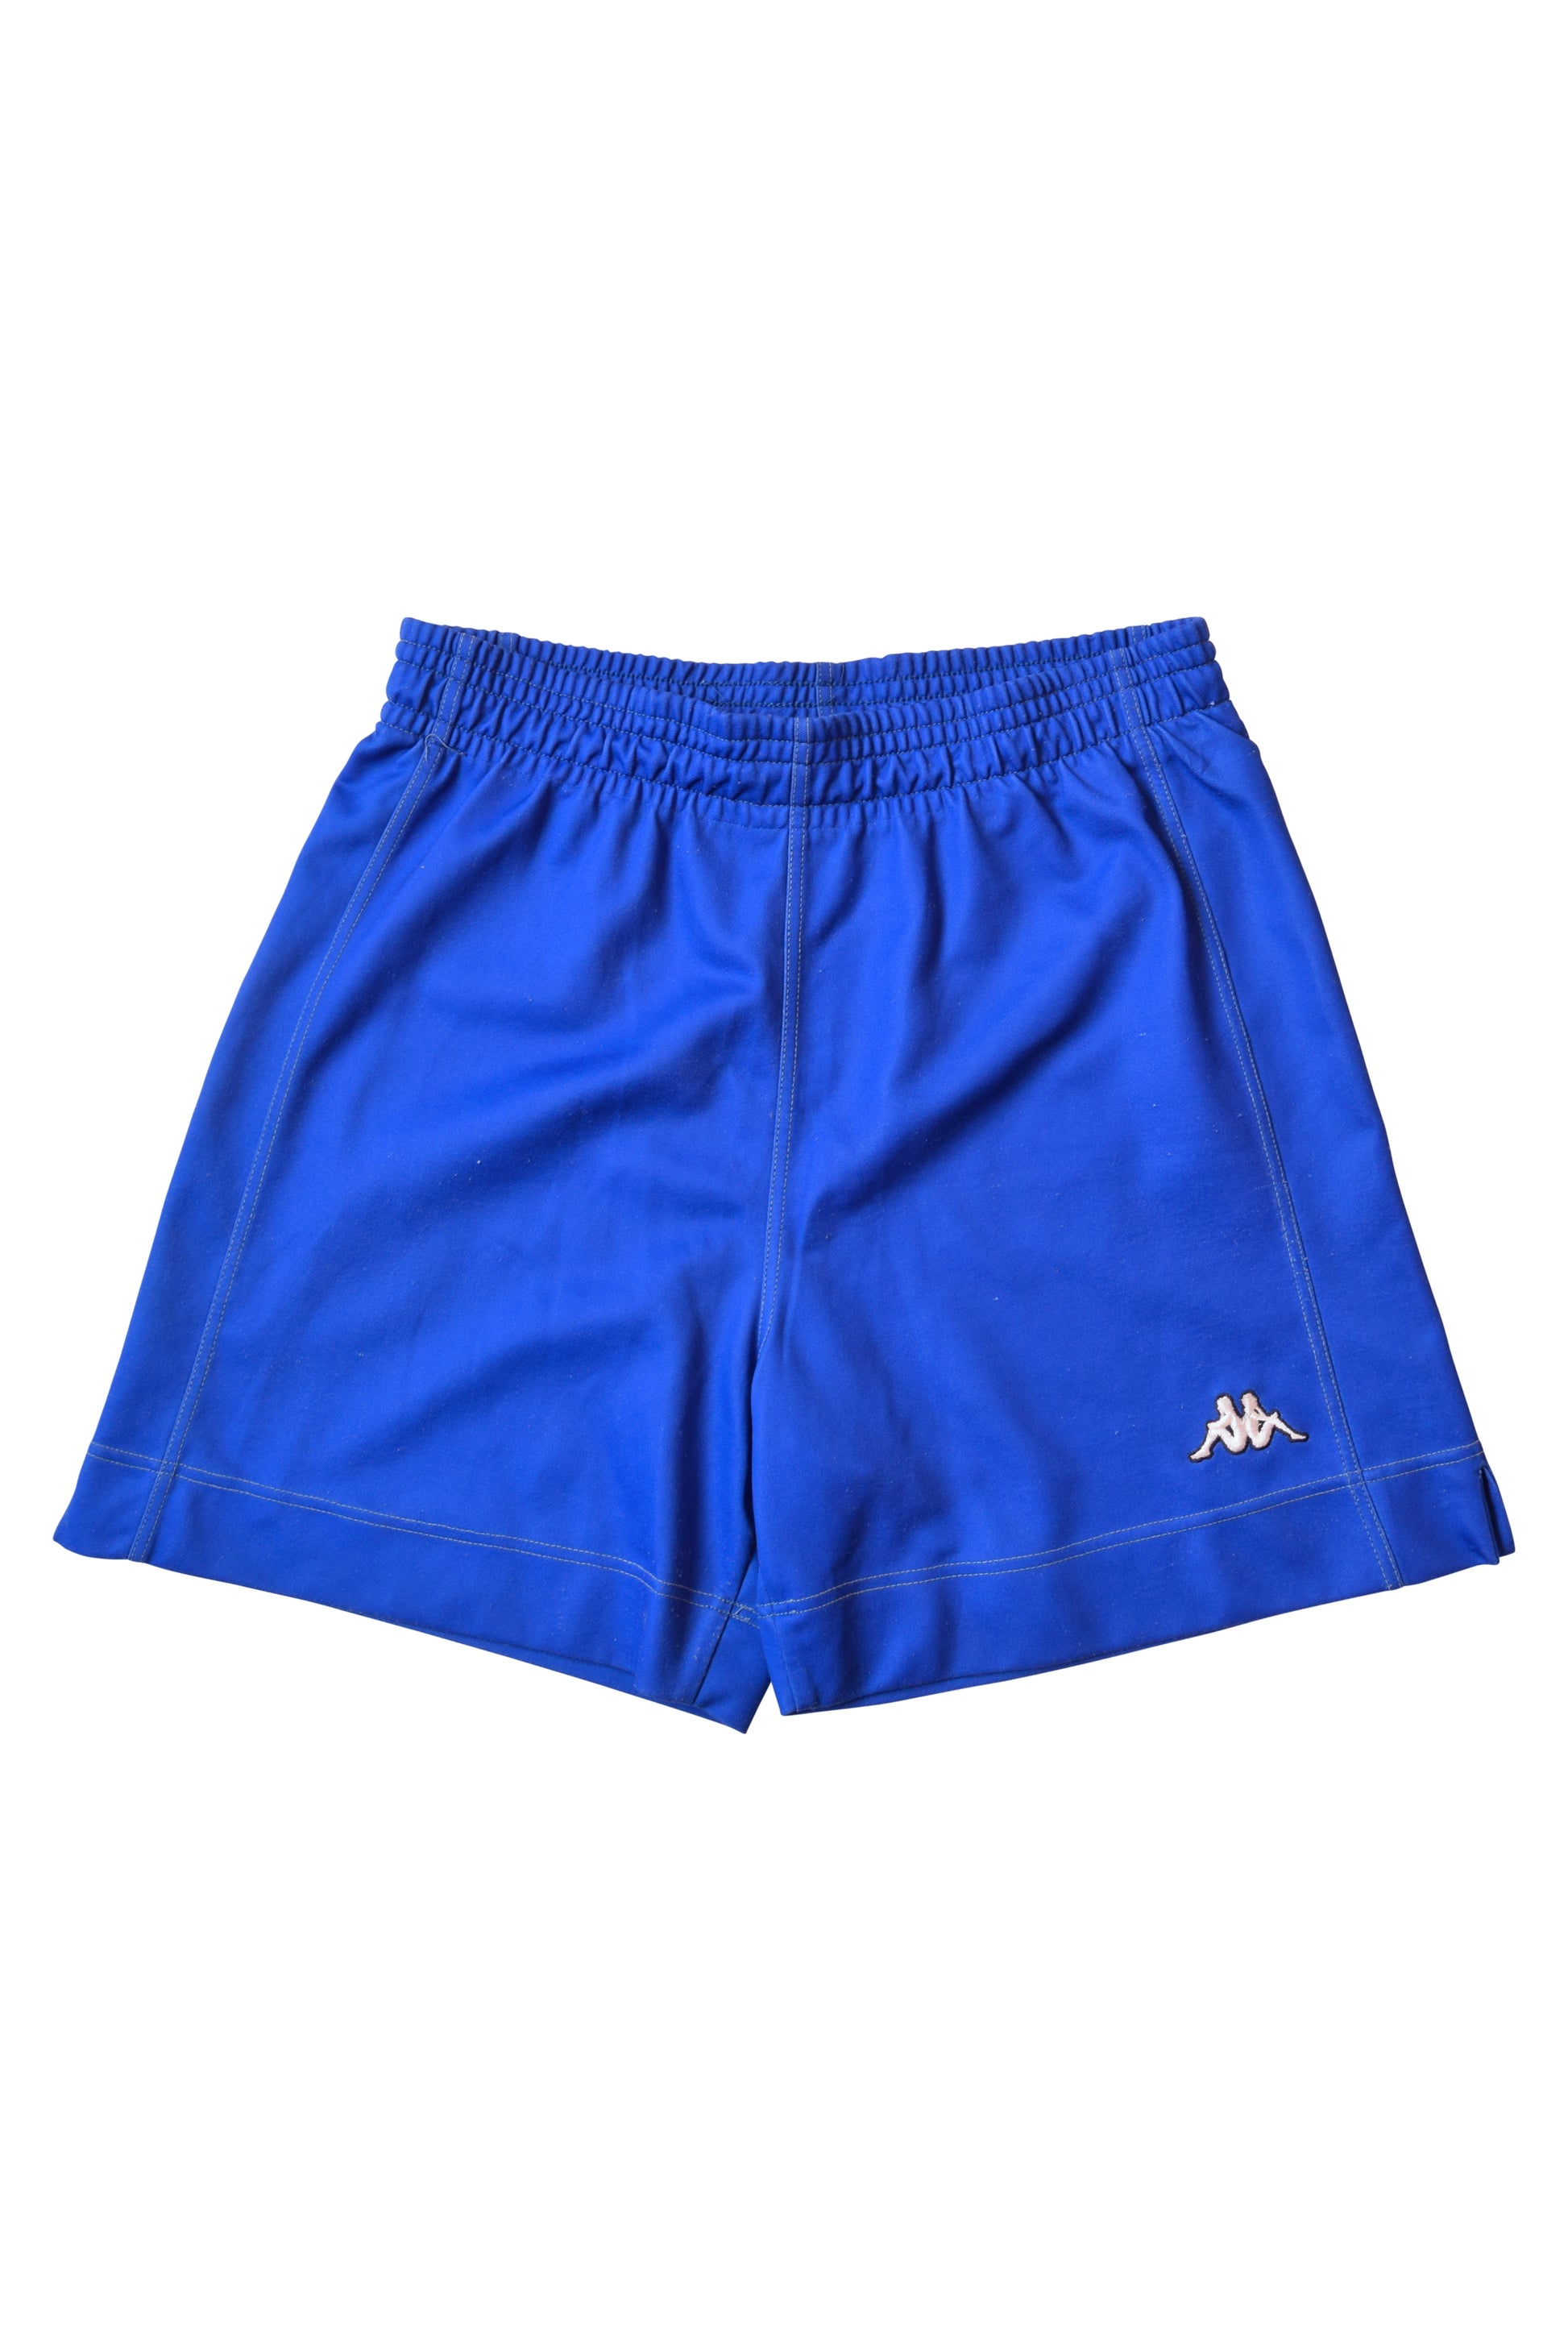 Vintage Italy Kappa Shorts 90's Made in Italy Size M 